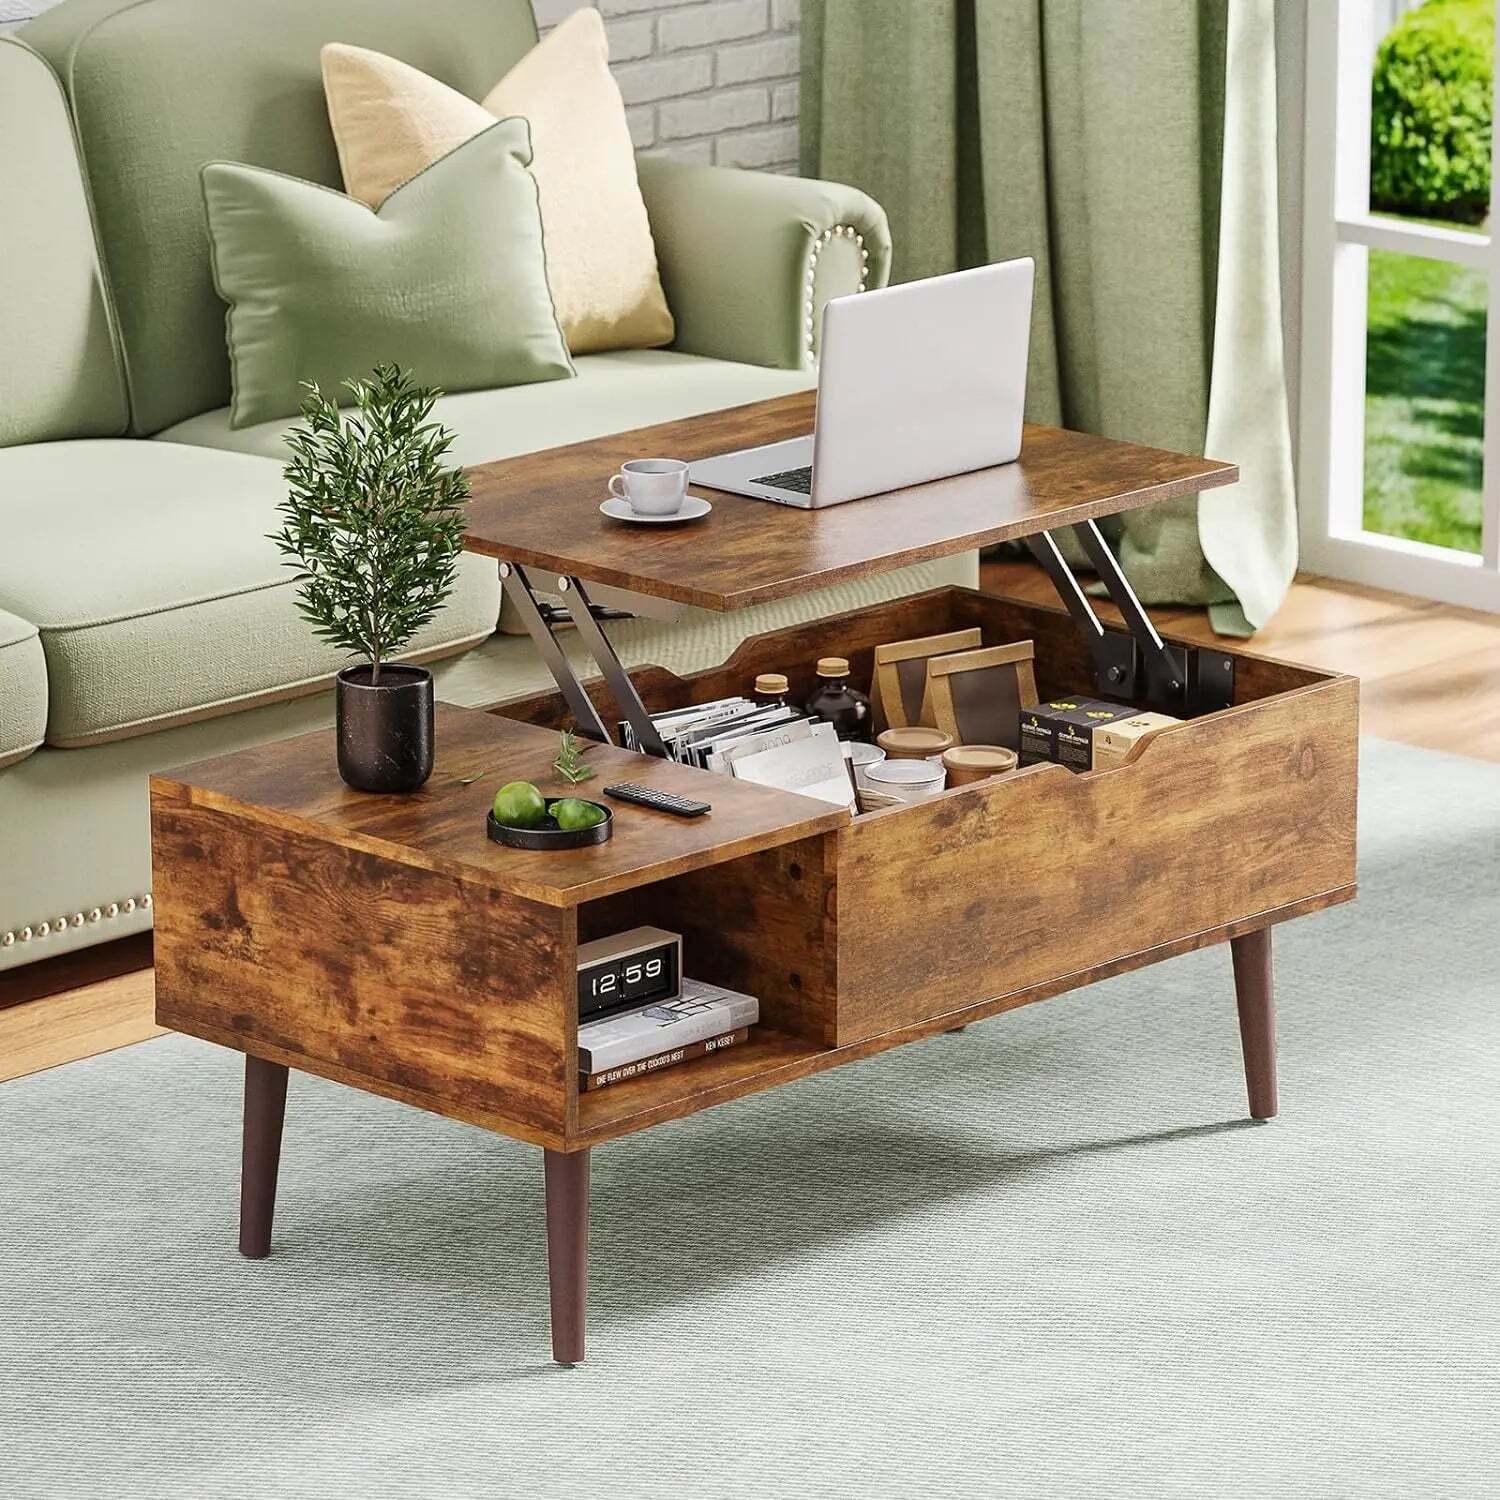 Modern Lift Top Coffee Table Wooden Furniture with Storage Shelf and Hidden Comp